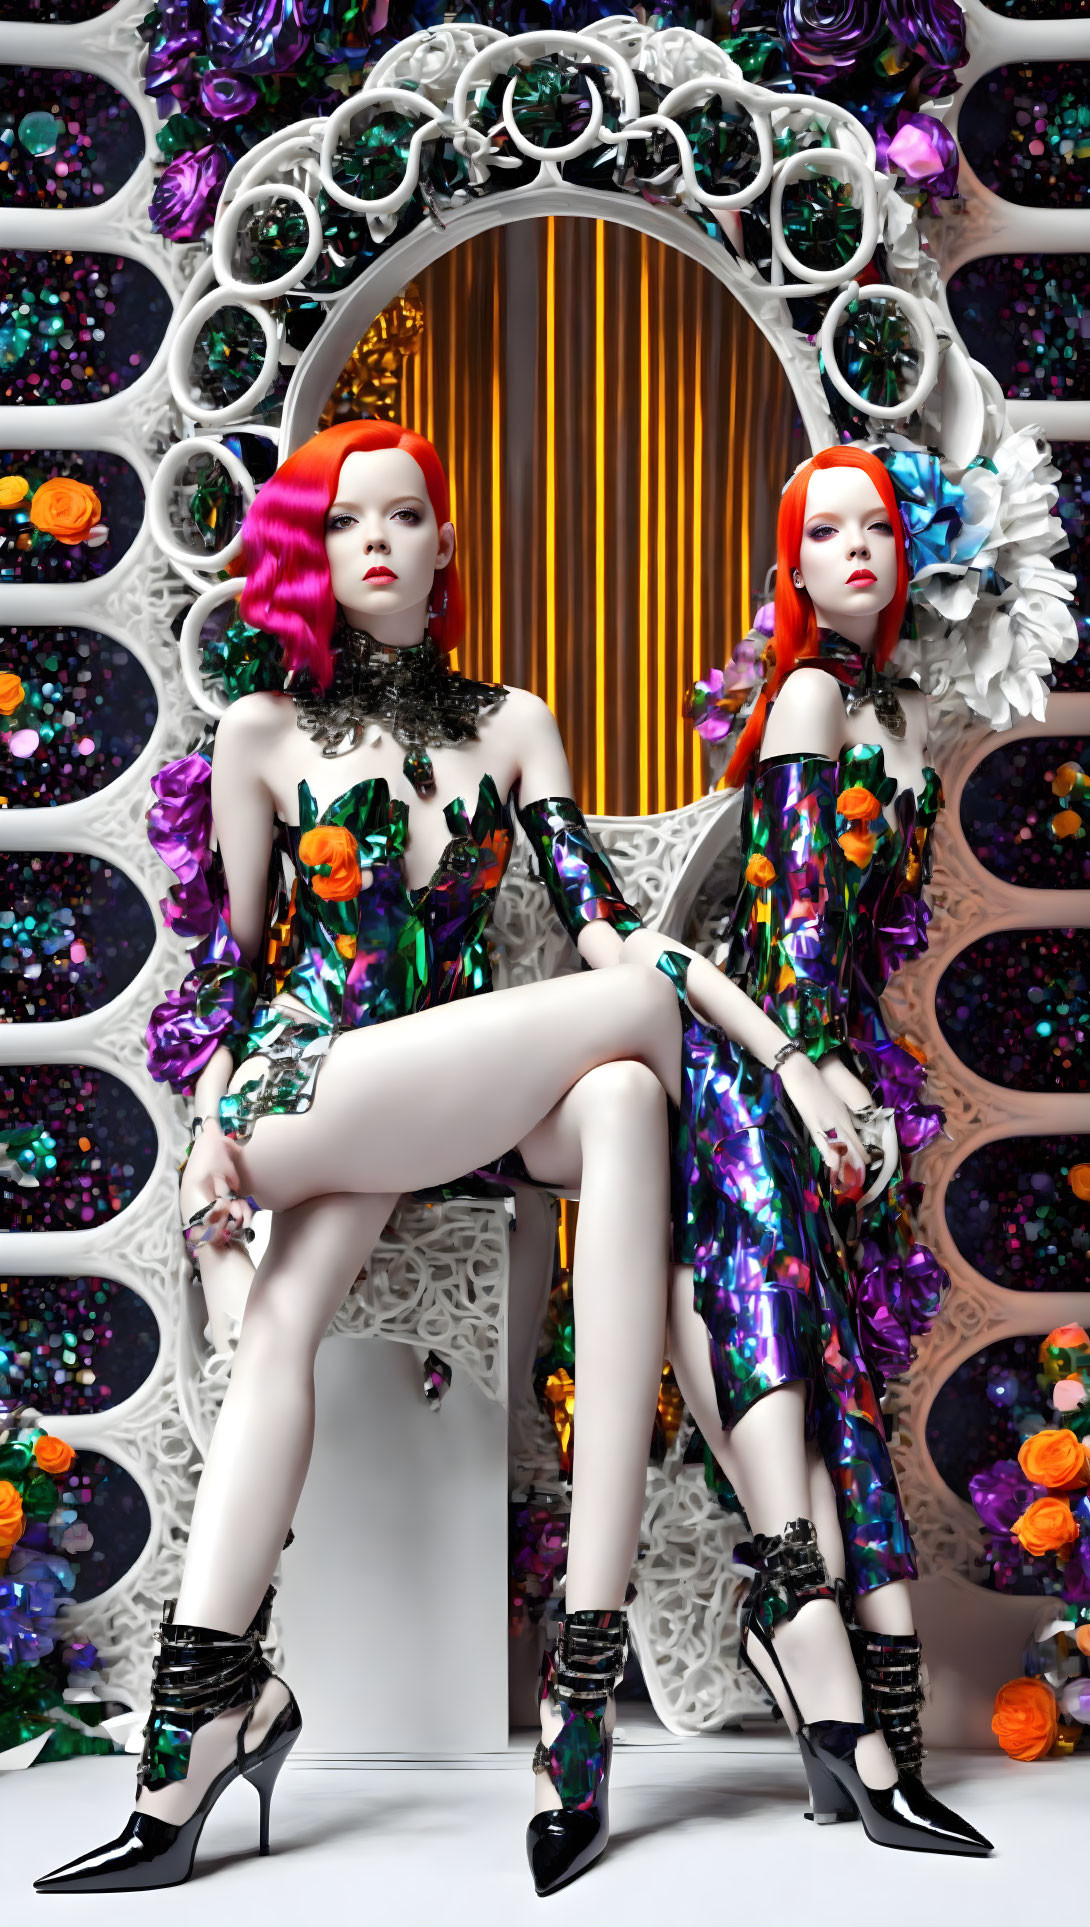 Symmetrical mannequins with red and purple hair in floral dresses and high heels against floral arch